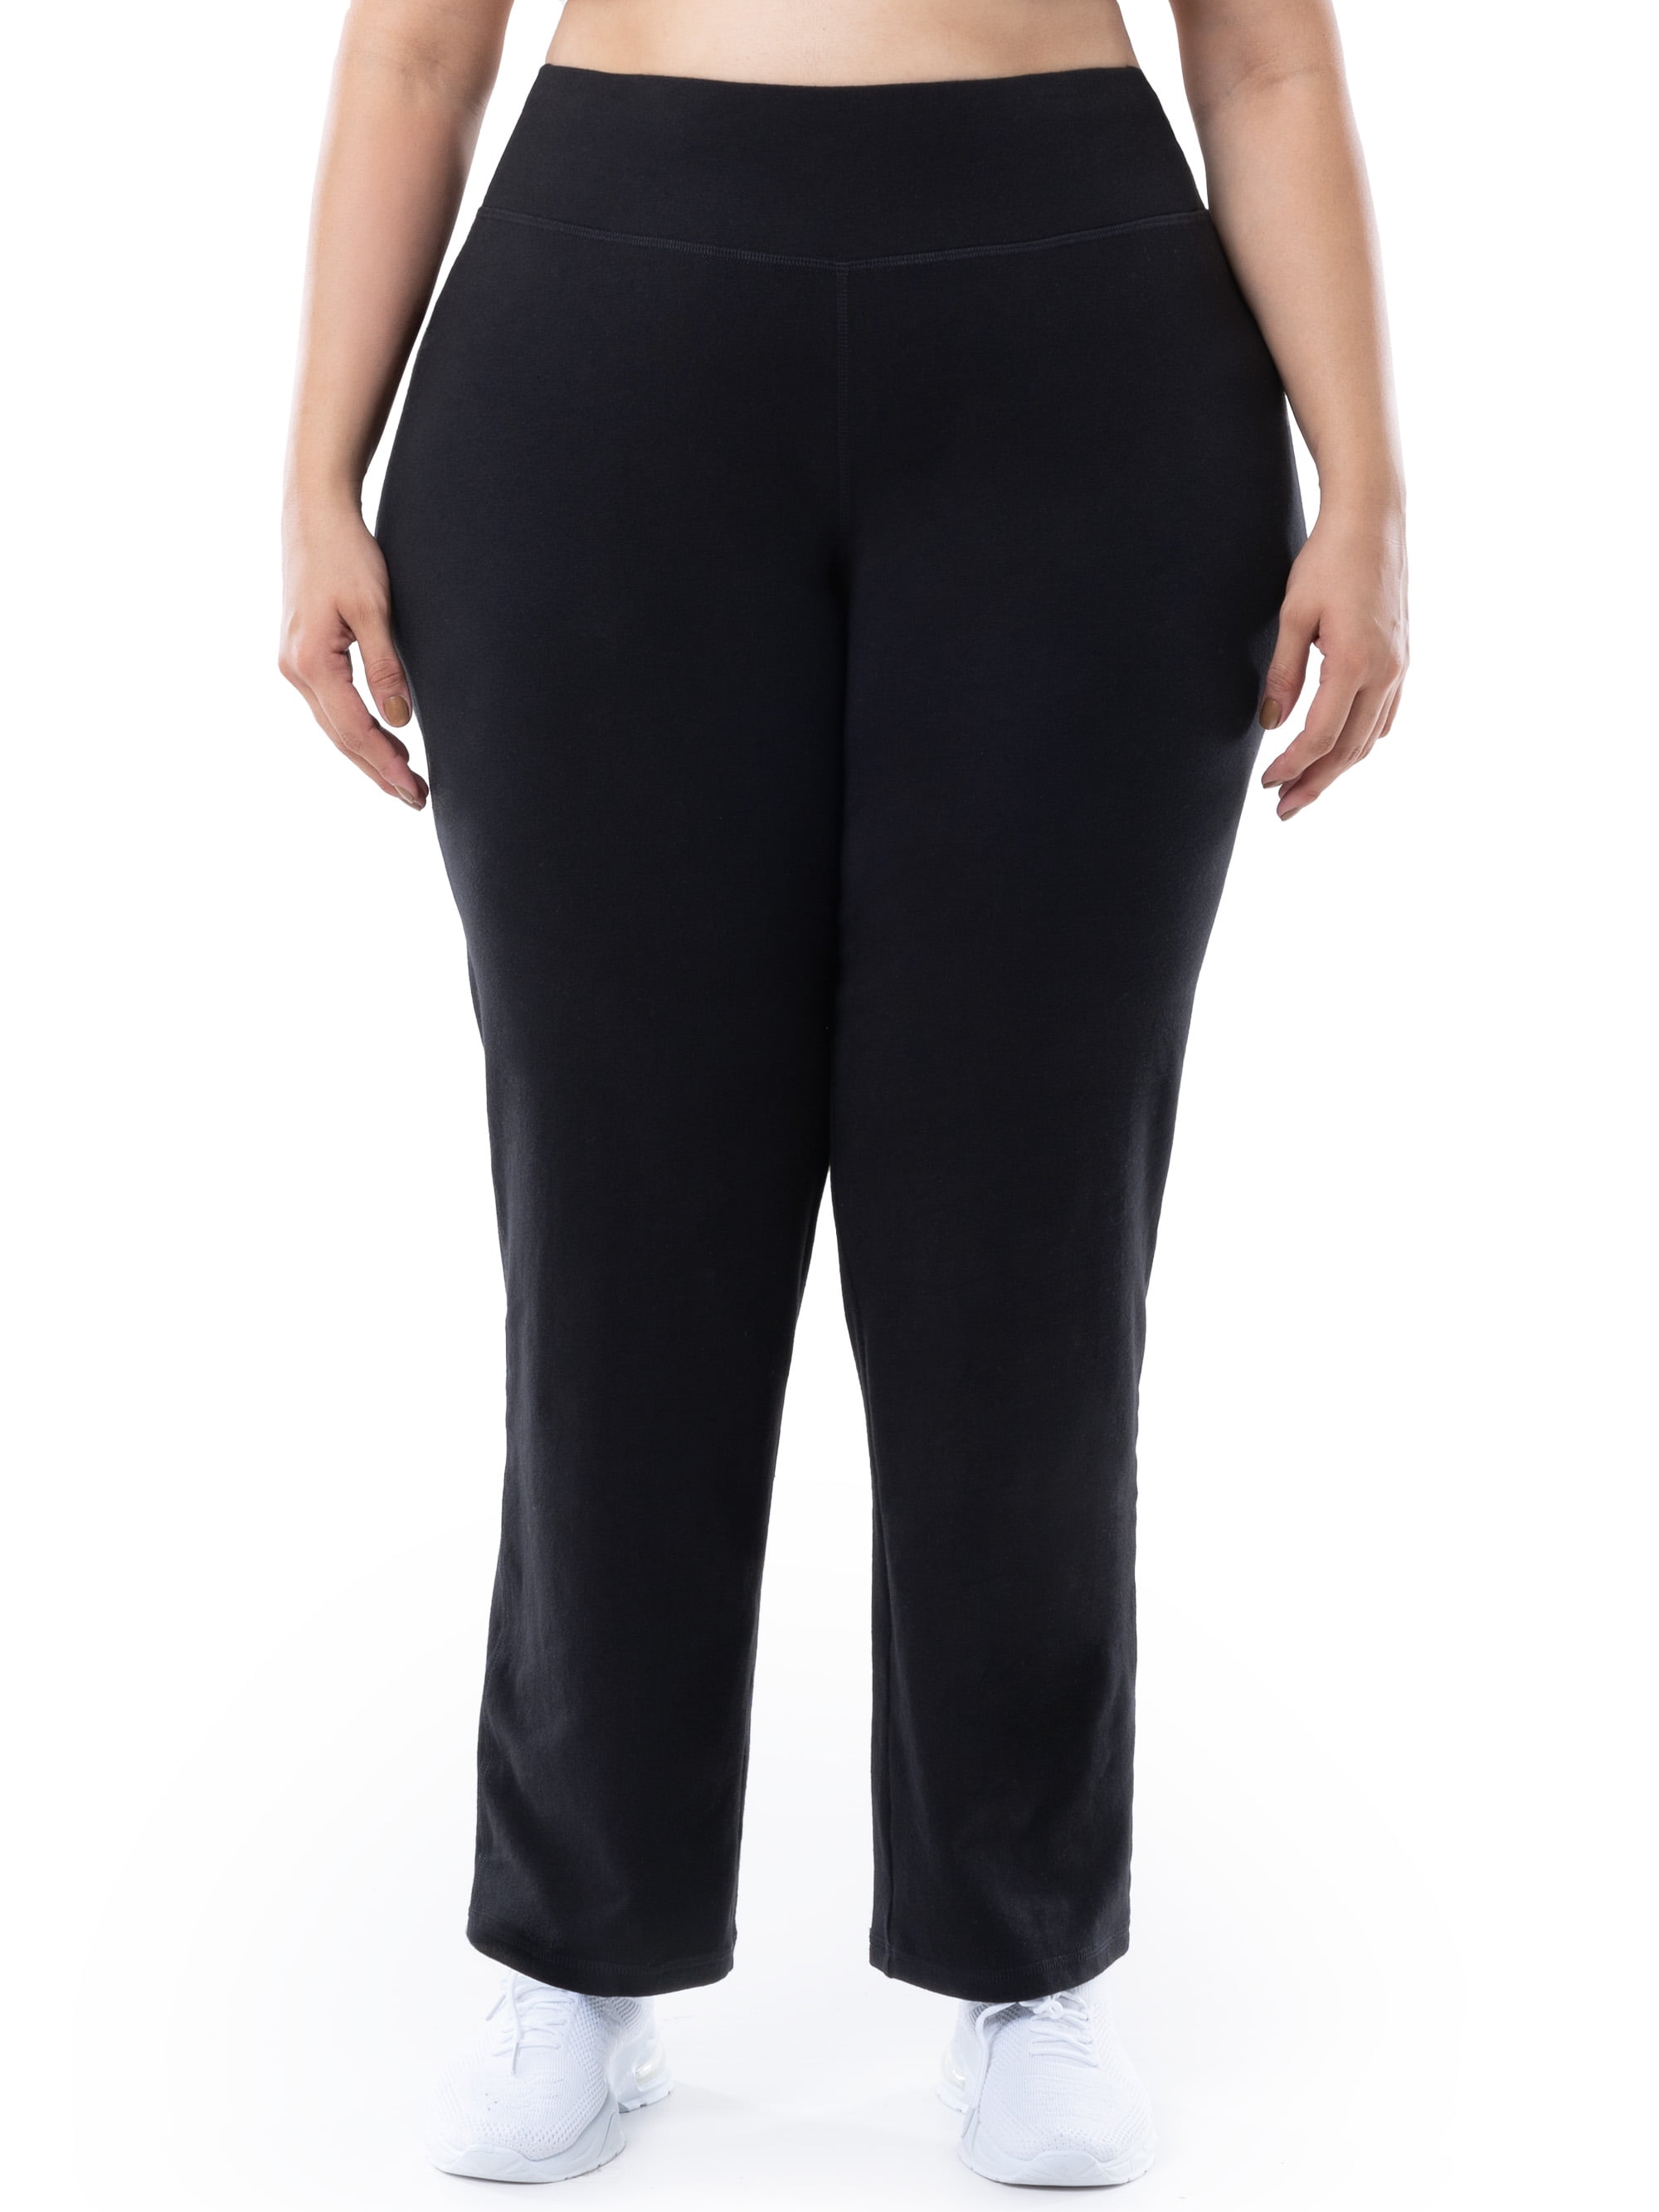 NEW Athletic Works Women Plus Size 5X 32W - 34W Commuter Jogger